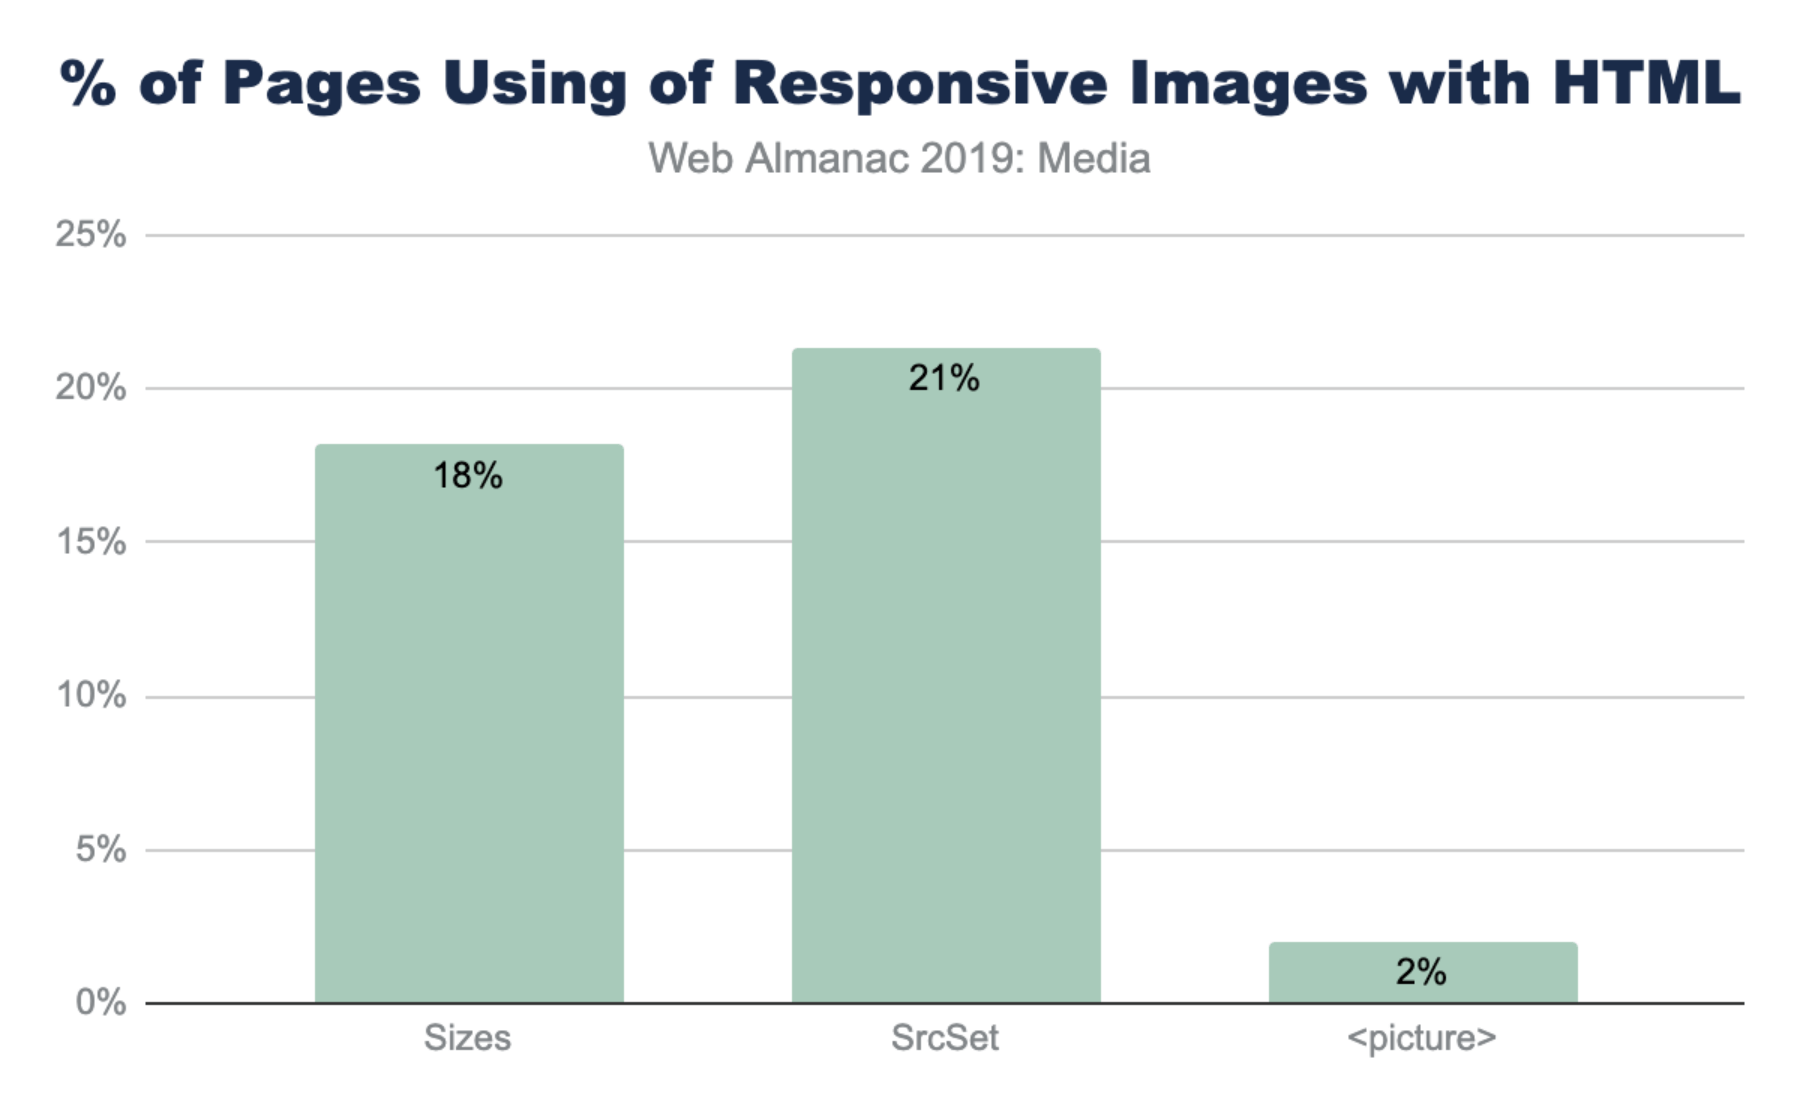 Percent of pages using responsive images with HTML.